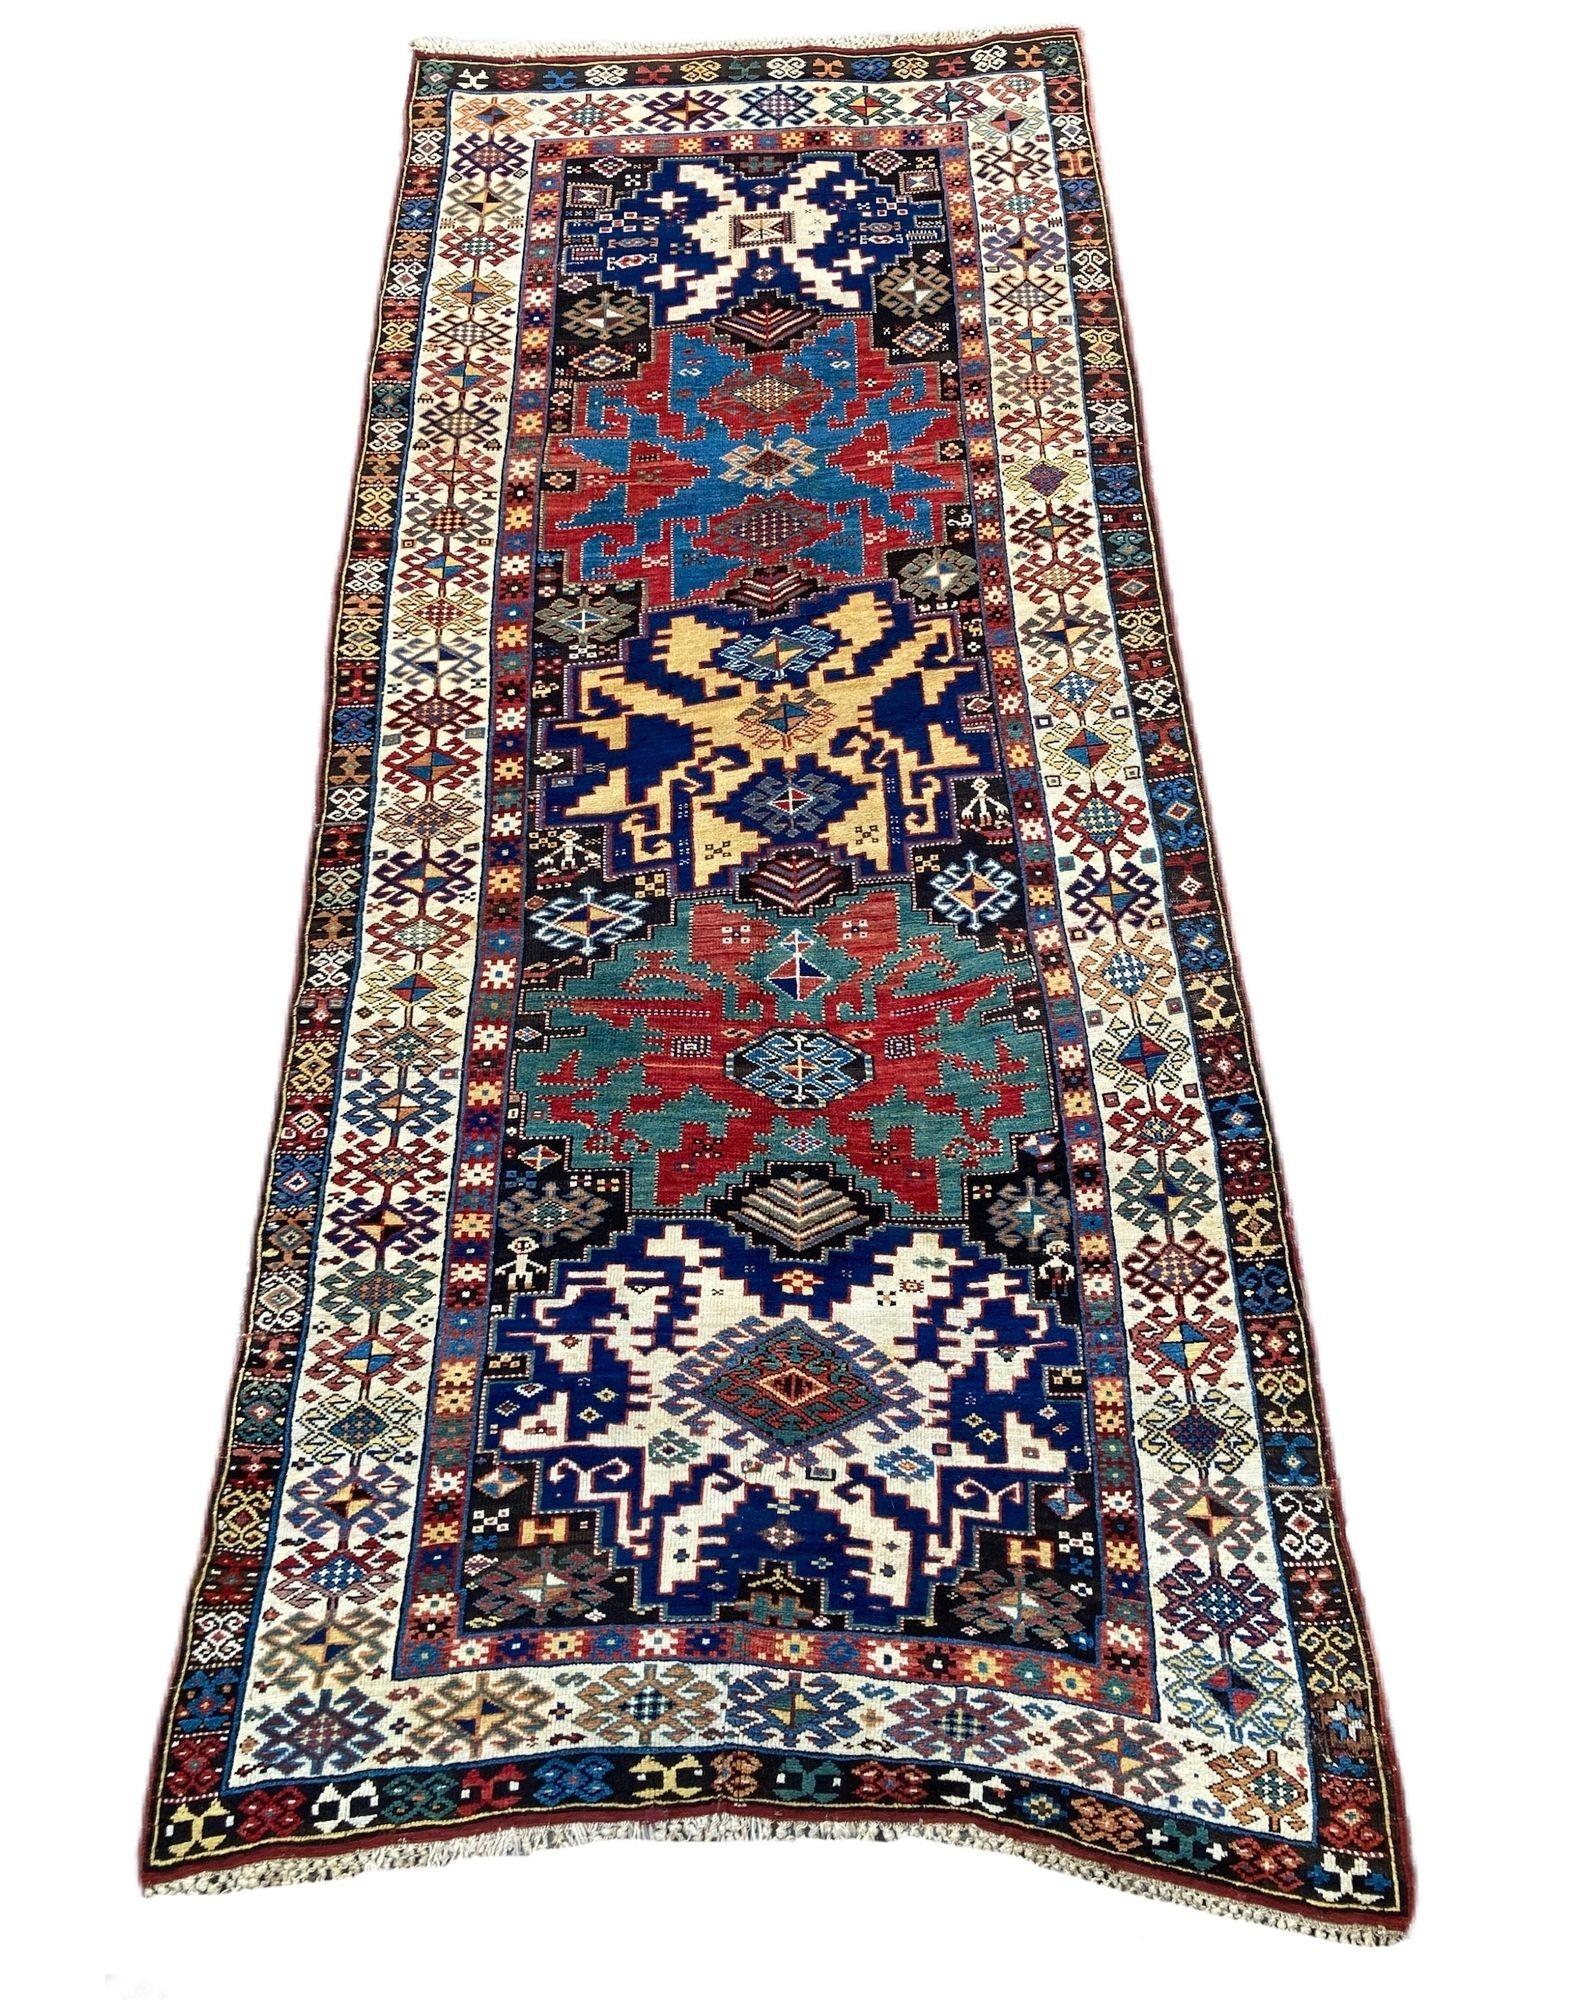 A stunning antique Kazak rug, handwoven in the Caucasus mountains of modern day Azerbaijan circa 1880. It features a 5 medallion geometrical design on a deep indigo field of stylised flowers and figures. Fabulous colours and highly